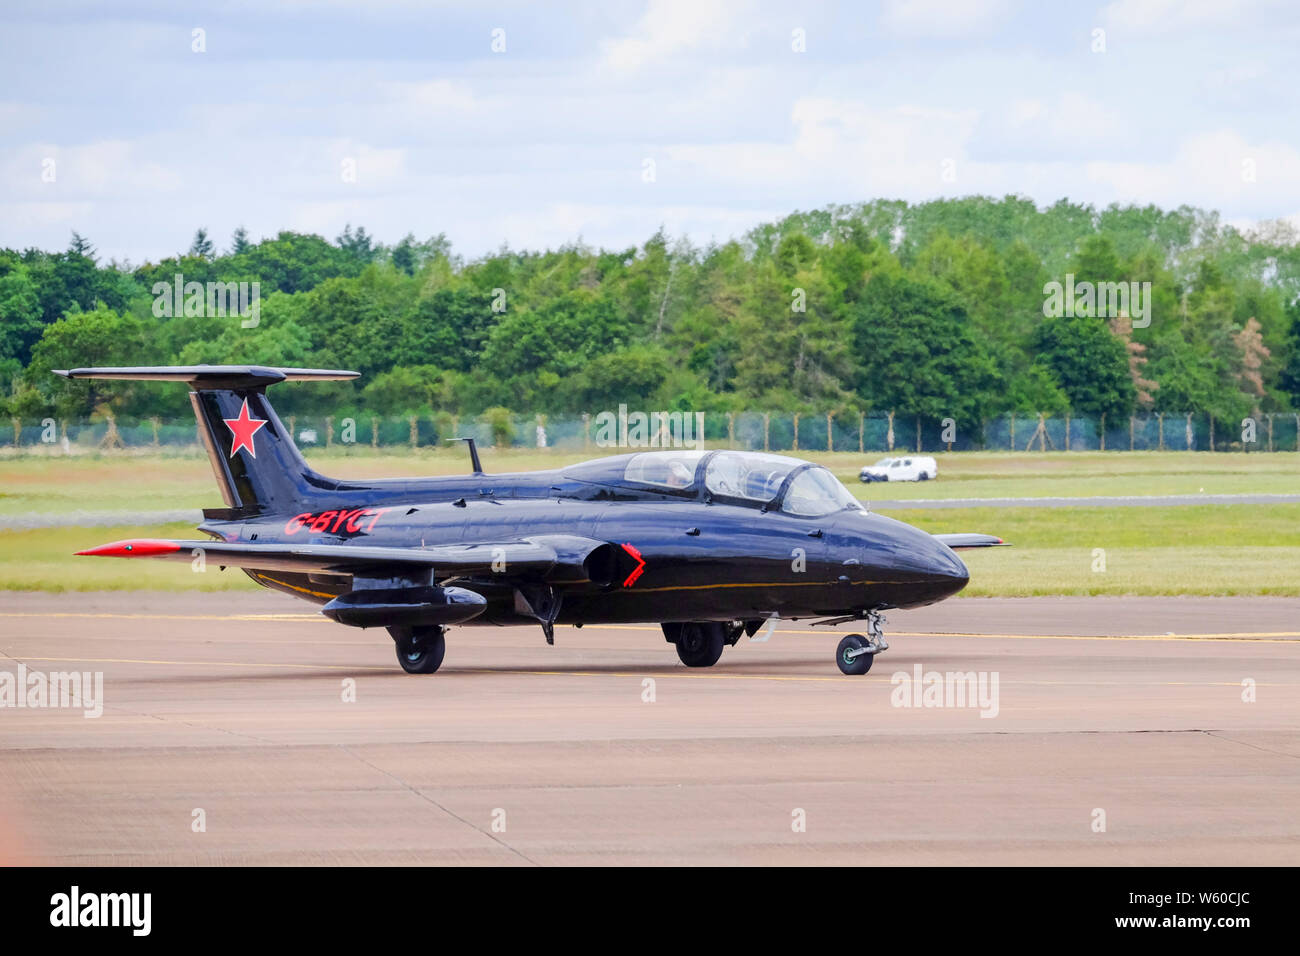 An Aero L-39 albatross  arrives at RAF Fairford, Gloucestershire. Made by Aero Vodochody Stock Photo